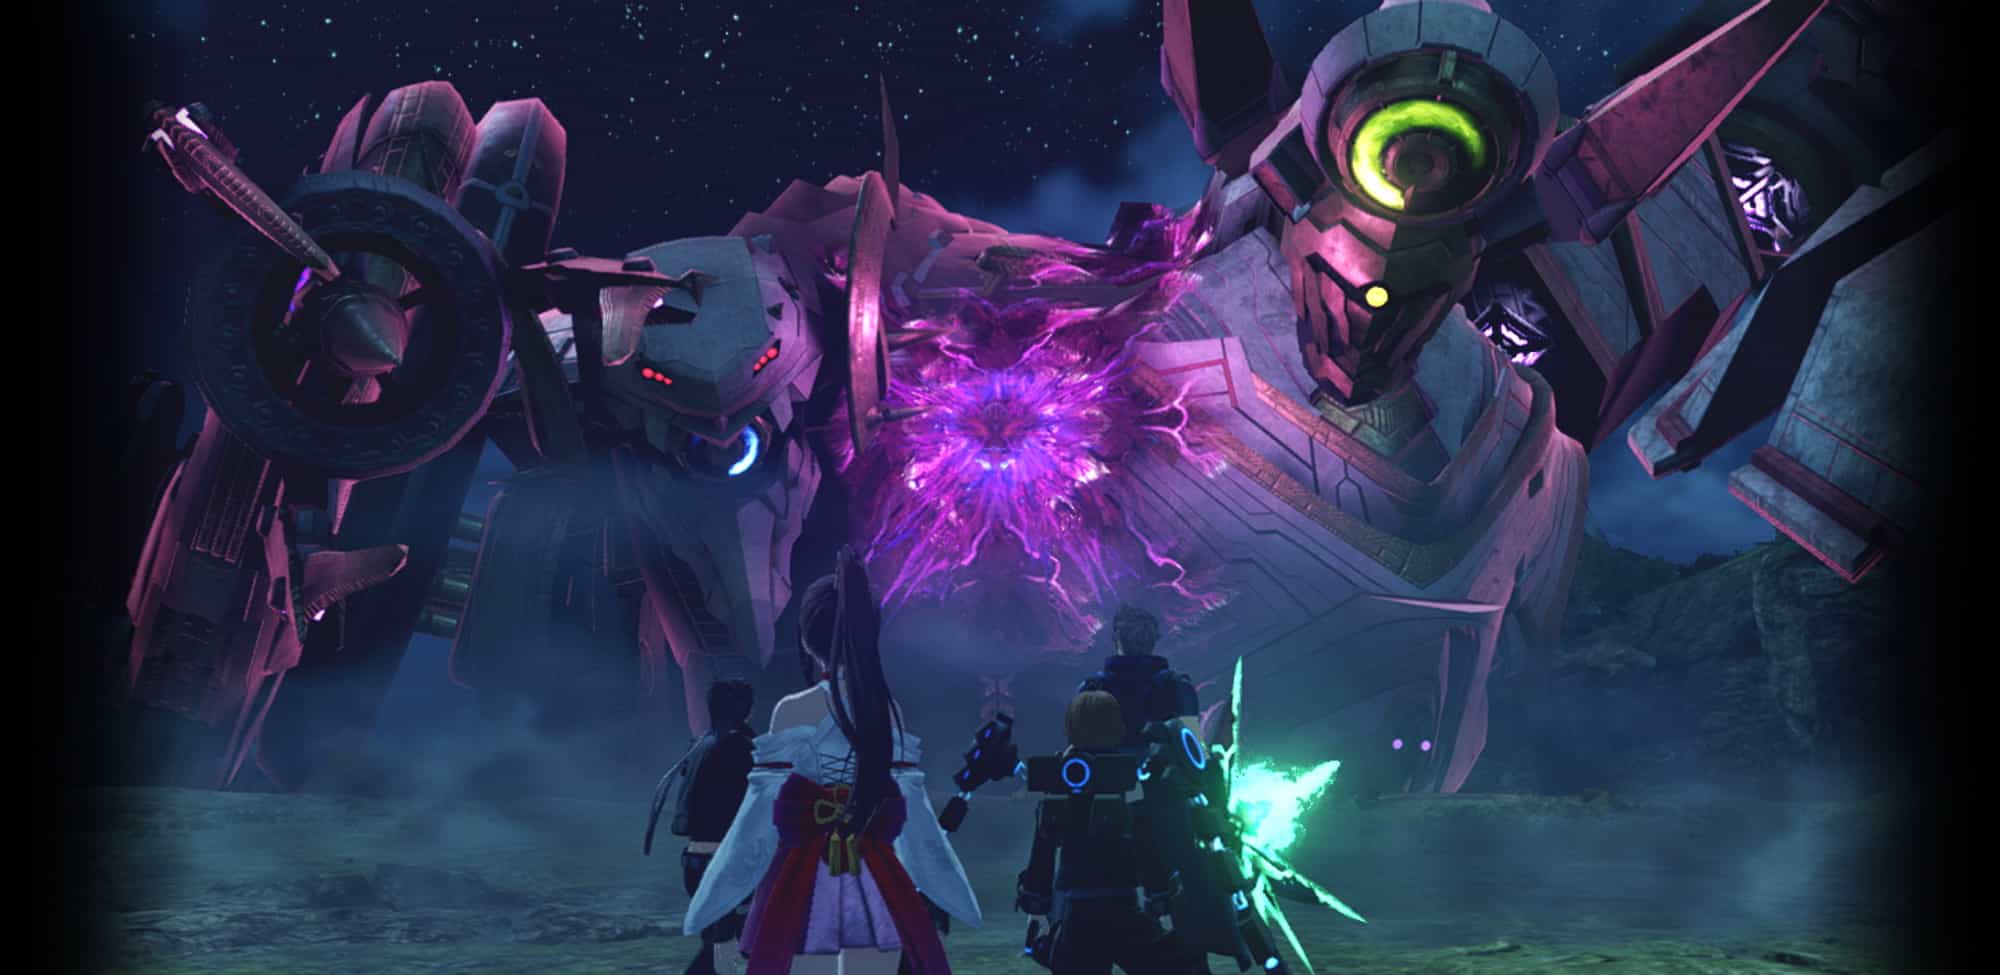 Xenoblade Chronicles 3: Future Redeemed DLC revealed - Story details,  amiibos, release date, and more